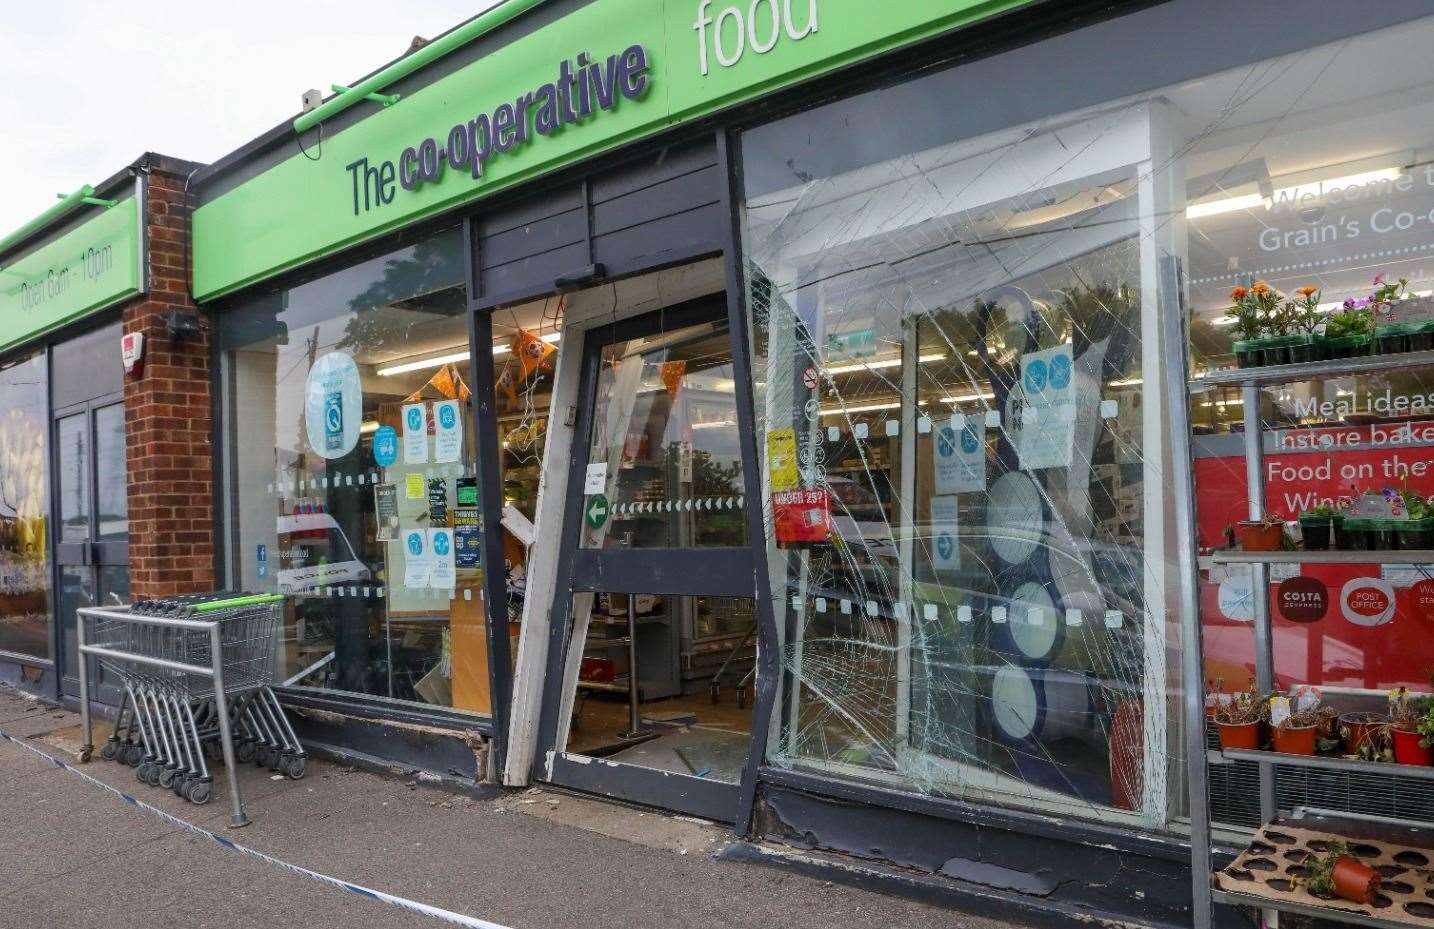 The Co-op on the Isle of Grain was close after the shop was ram-raided by thieves overnight. Picture: UKNIP